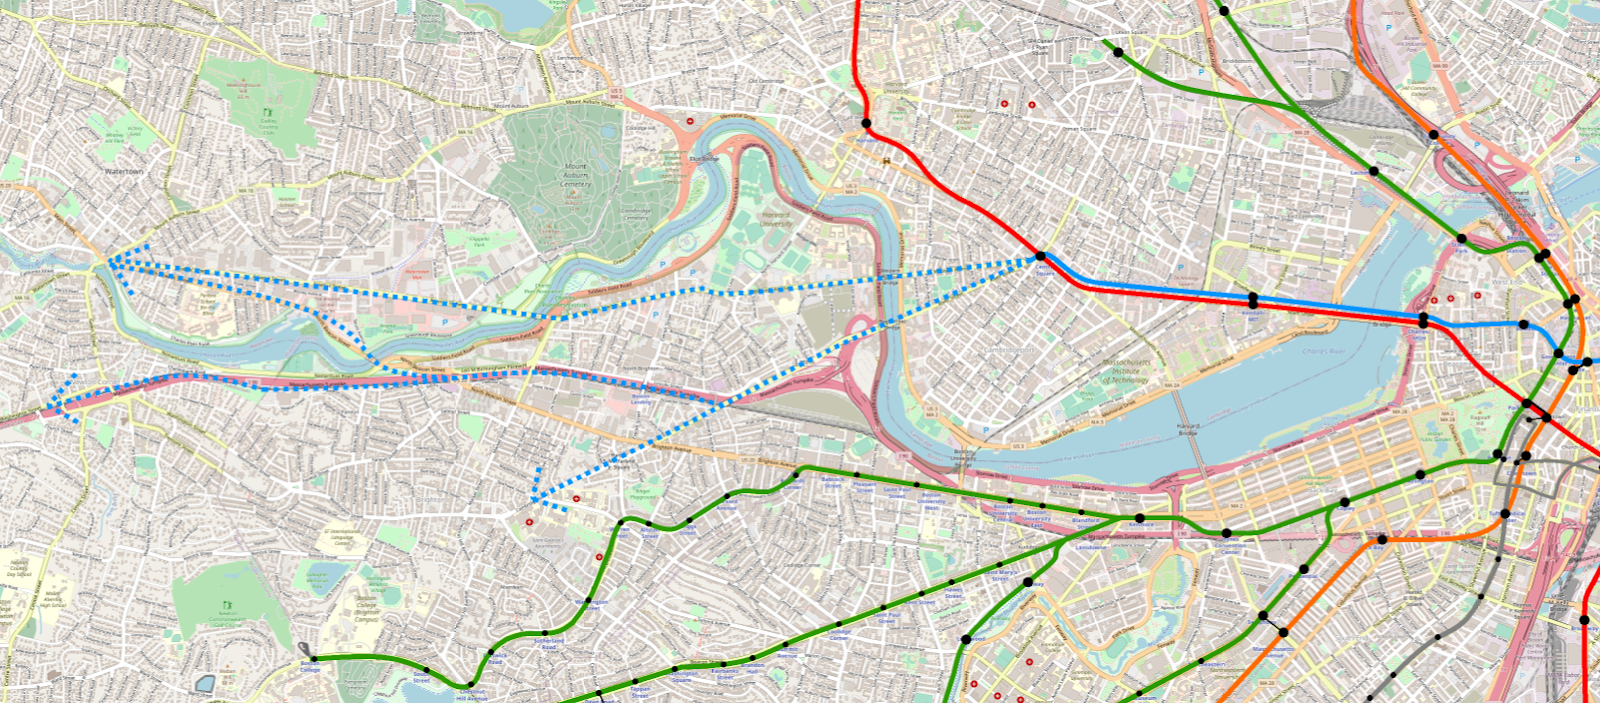 A map of the current MBTA rapid transit system, showing Back Bay, Longwood, Brookline, Allston, and Cambridge. The Blue Line is extended to Charles/MGH and then across the river to Kendall/MIT, doubling the Red Line to Central. Dotted lines mark possible extensions west to Watertown via Western Ave & Arsenal St or Cambridge St, the Mass Pike & N Beacon St, to Newton Corner via Cambridge St & the Mass Pike, or to Allston/Brighton via Cambridge St.